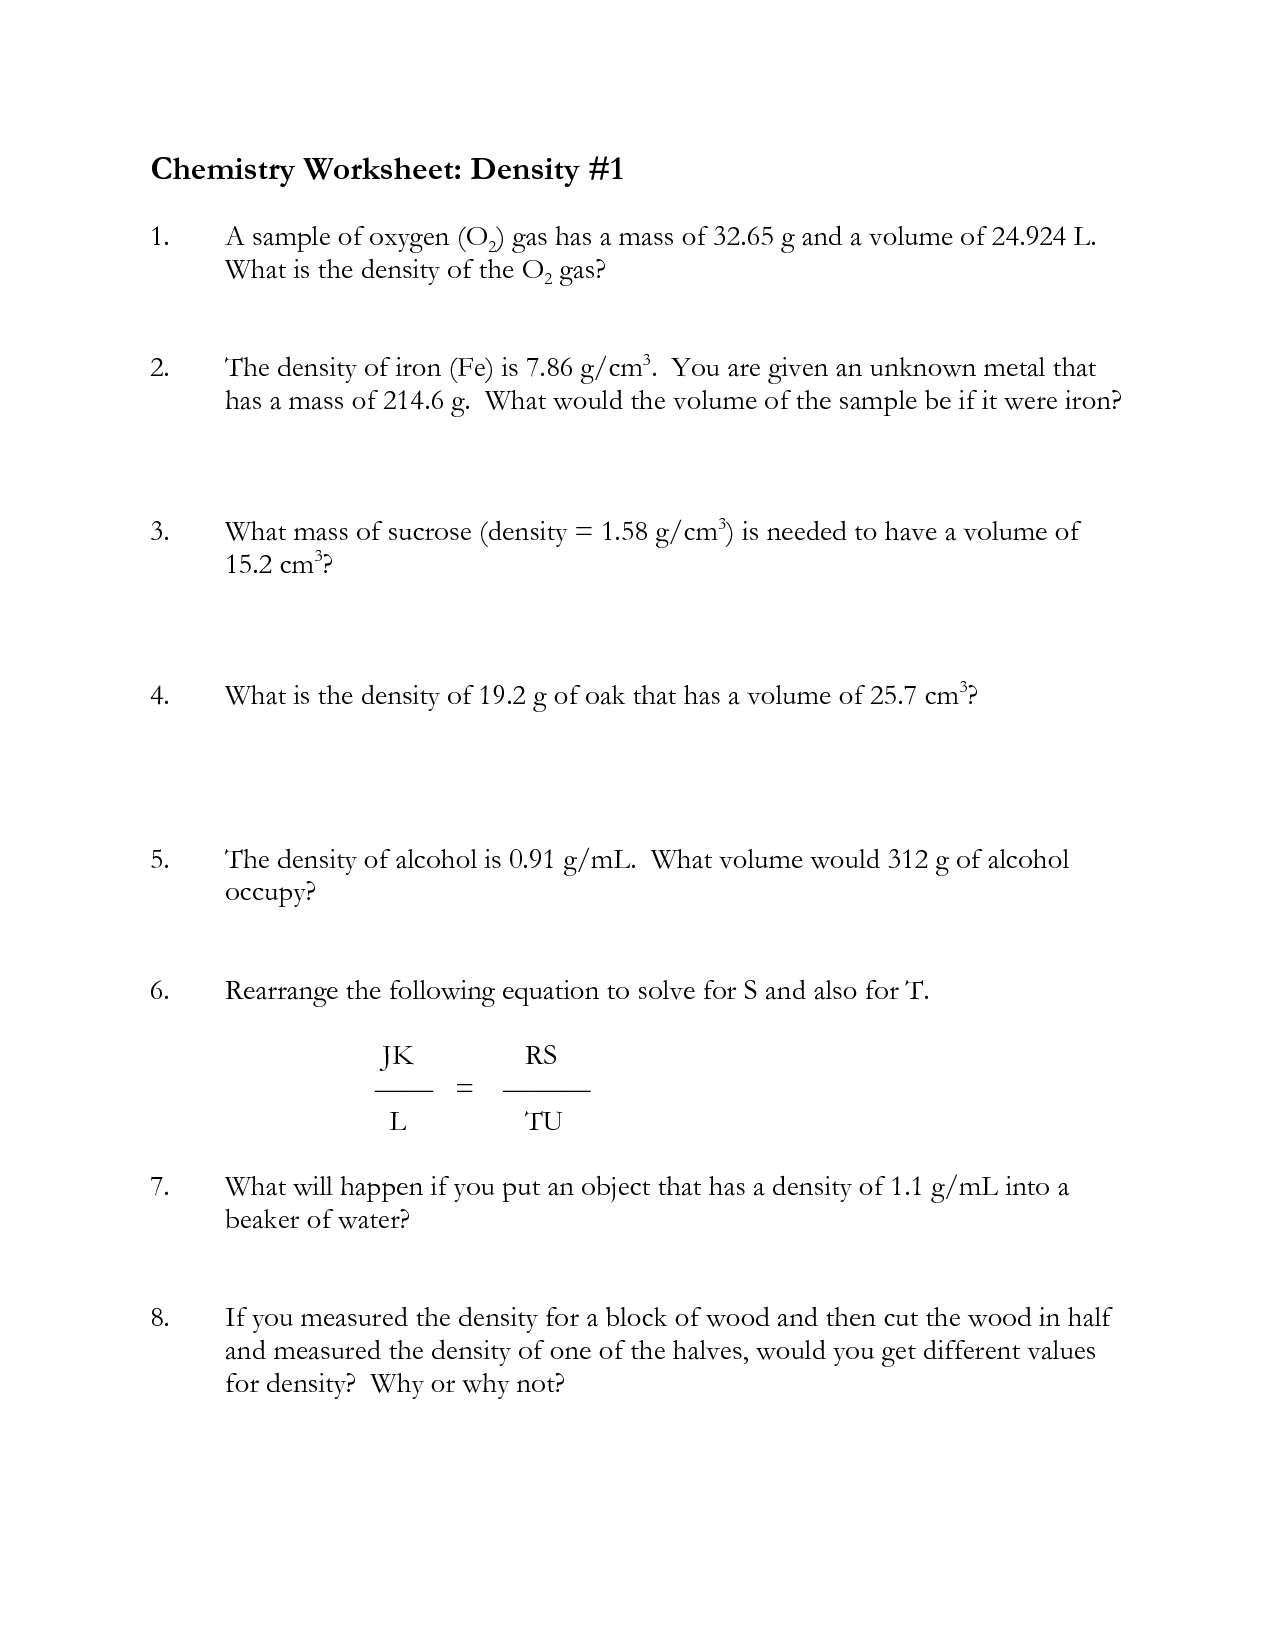 chemistry-density-worksheet-answer-key-printable-word-searches